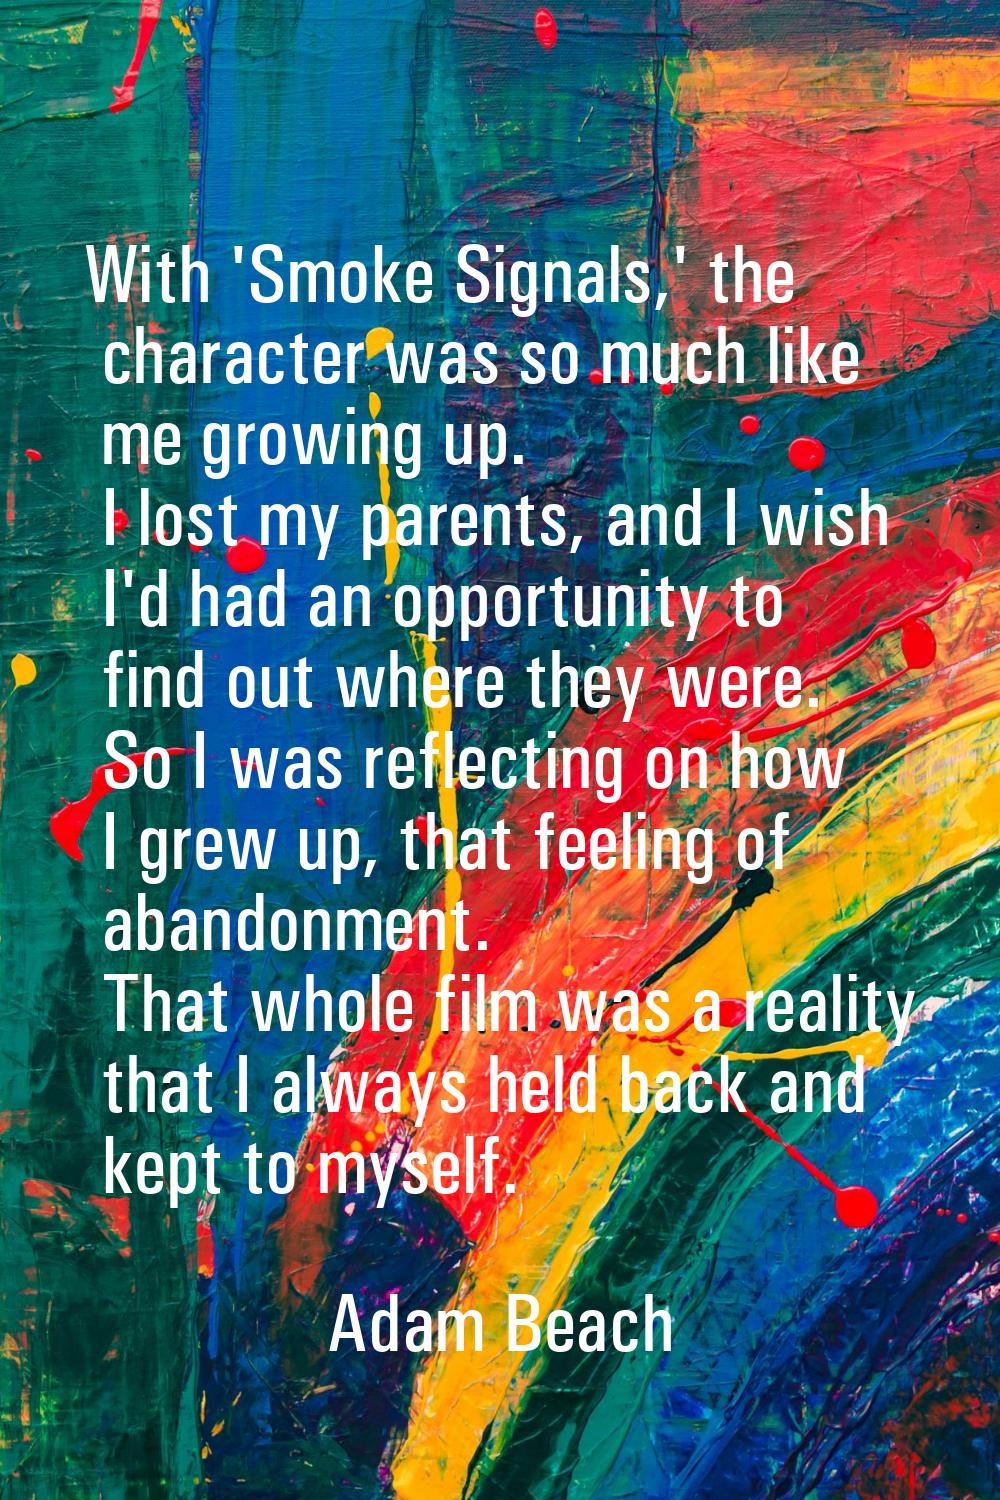 With 'Smoke Signals,' the character was so much like me growing up. I lost my parents, and I wish I